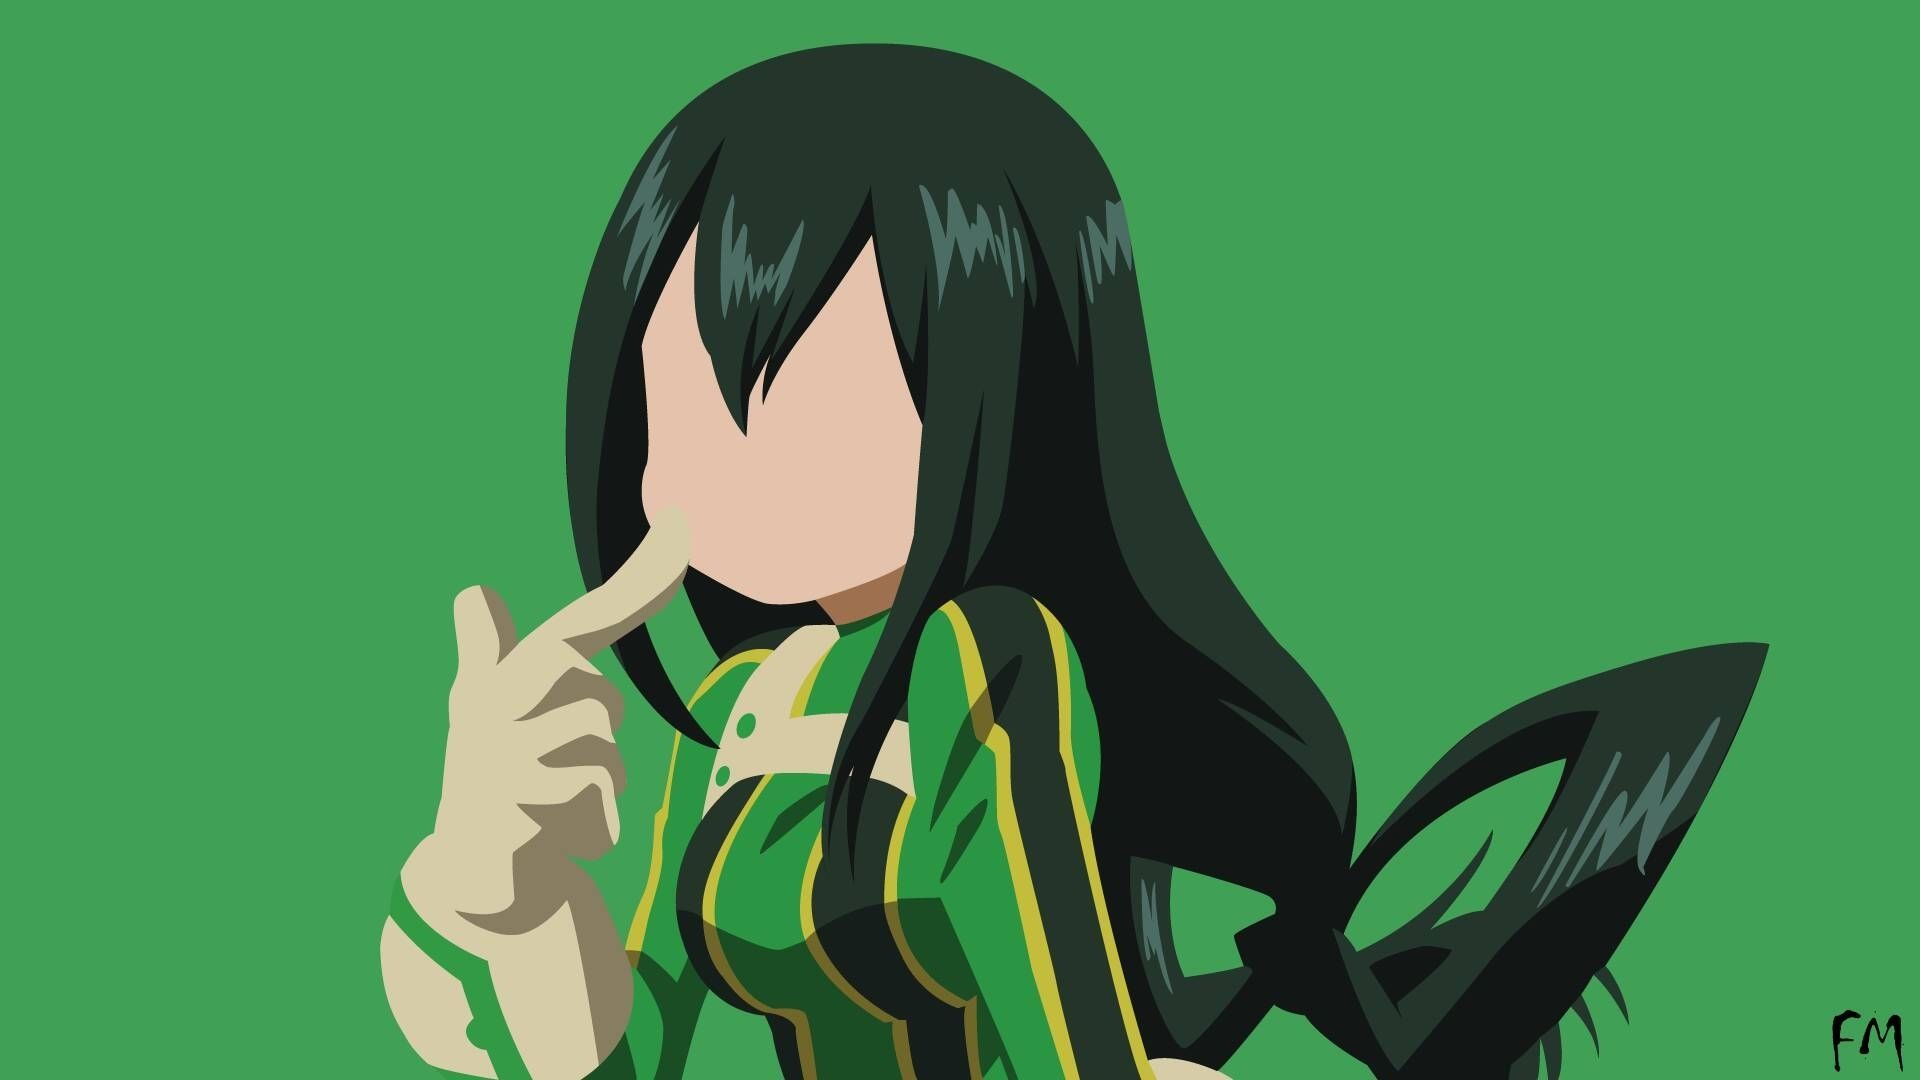 Froppy BNHA Wallpapers - Wallpaper Cave